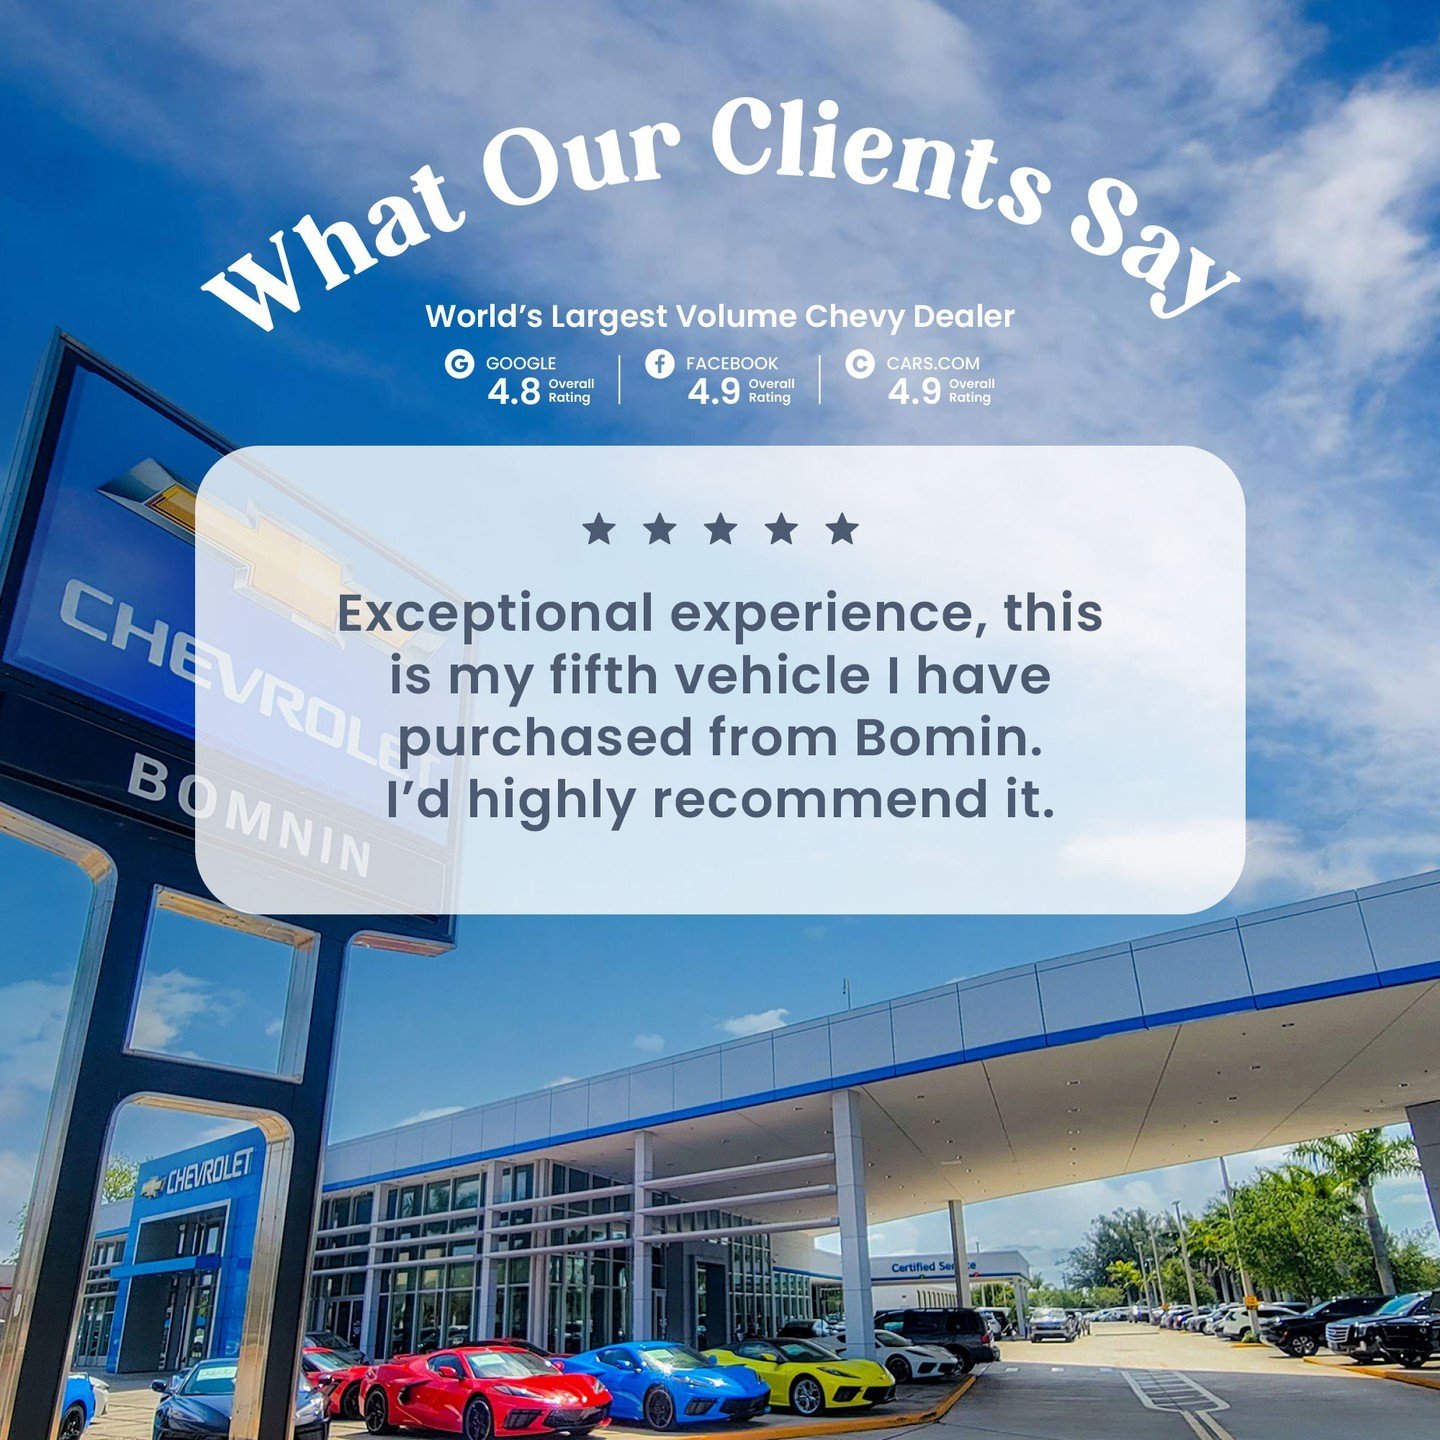 🌟🚗 Another happy customer, another success story at Bomnin Chevrolet! 🤝😃

We take pride in putting your satisfaction first and making your car-buying journey a breeze. Discover why our customers trust us to find their dream vehicles and hit the r